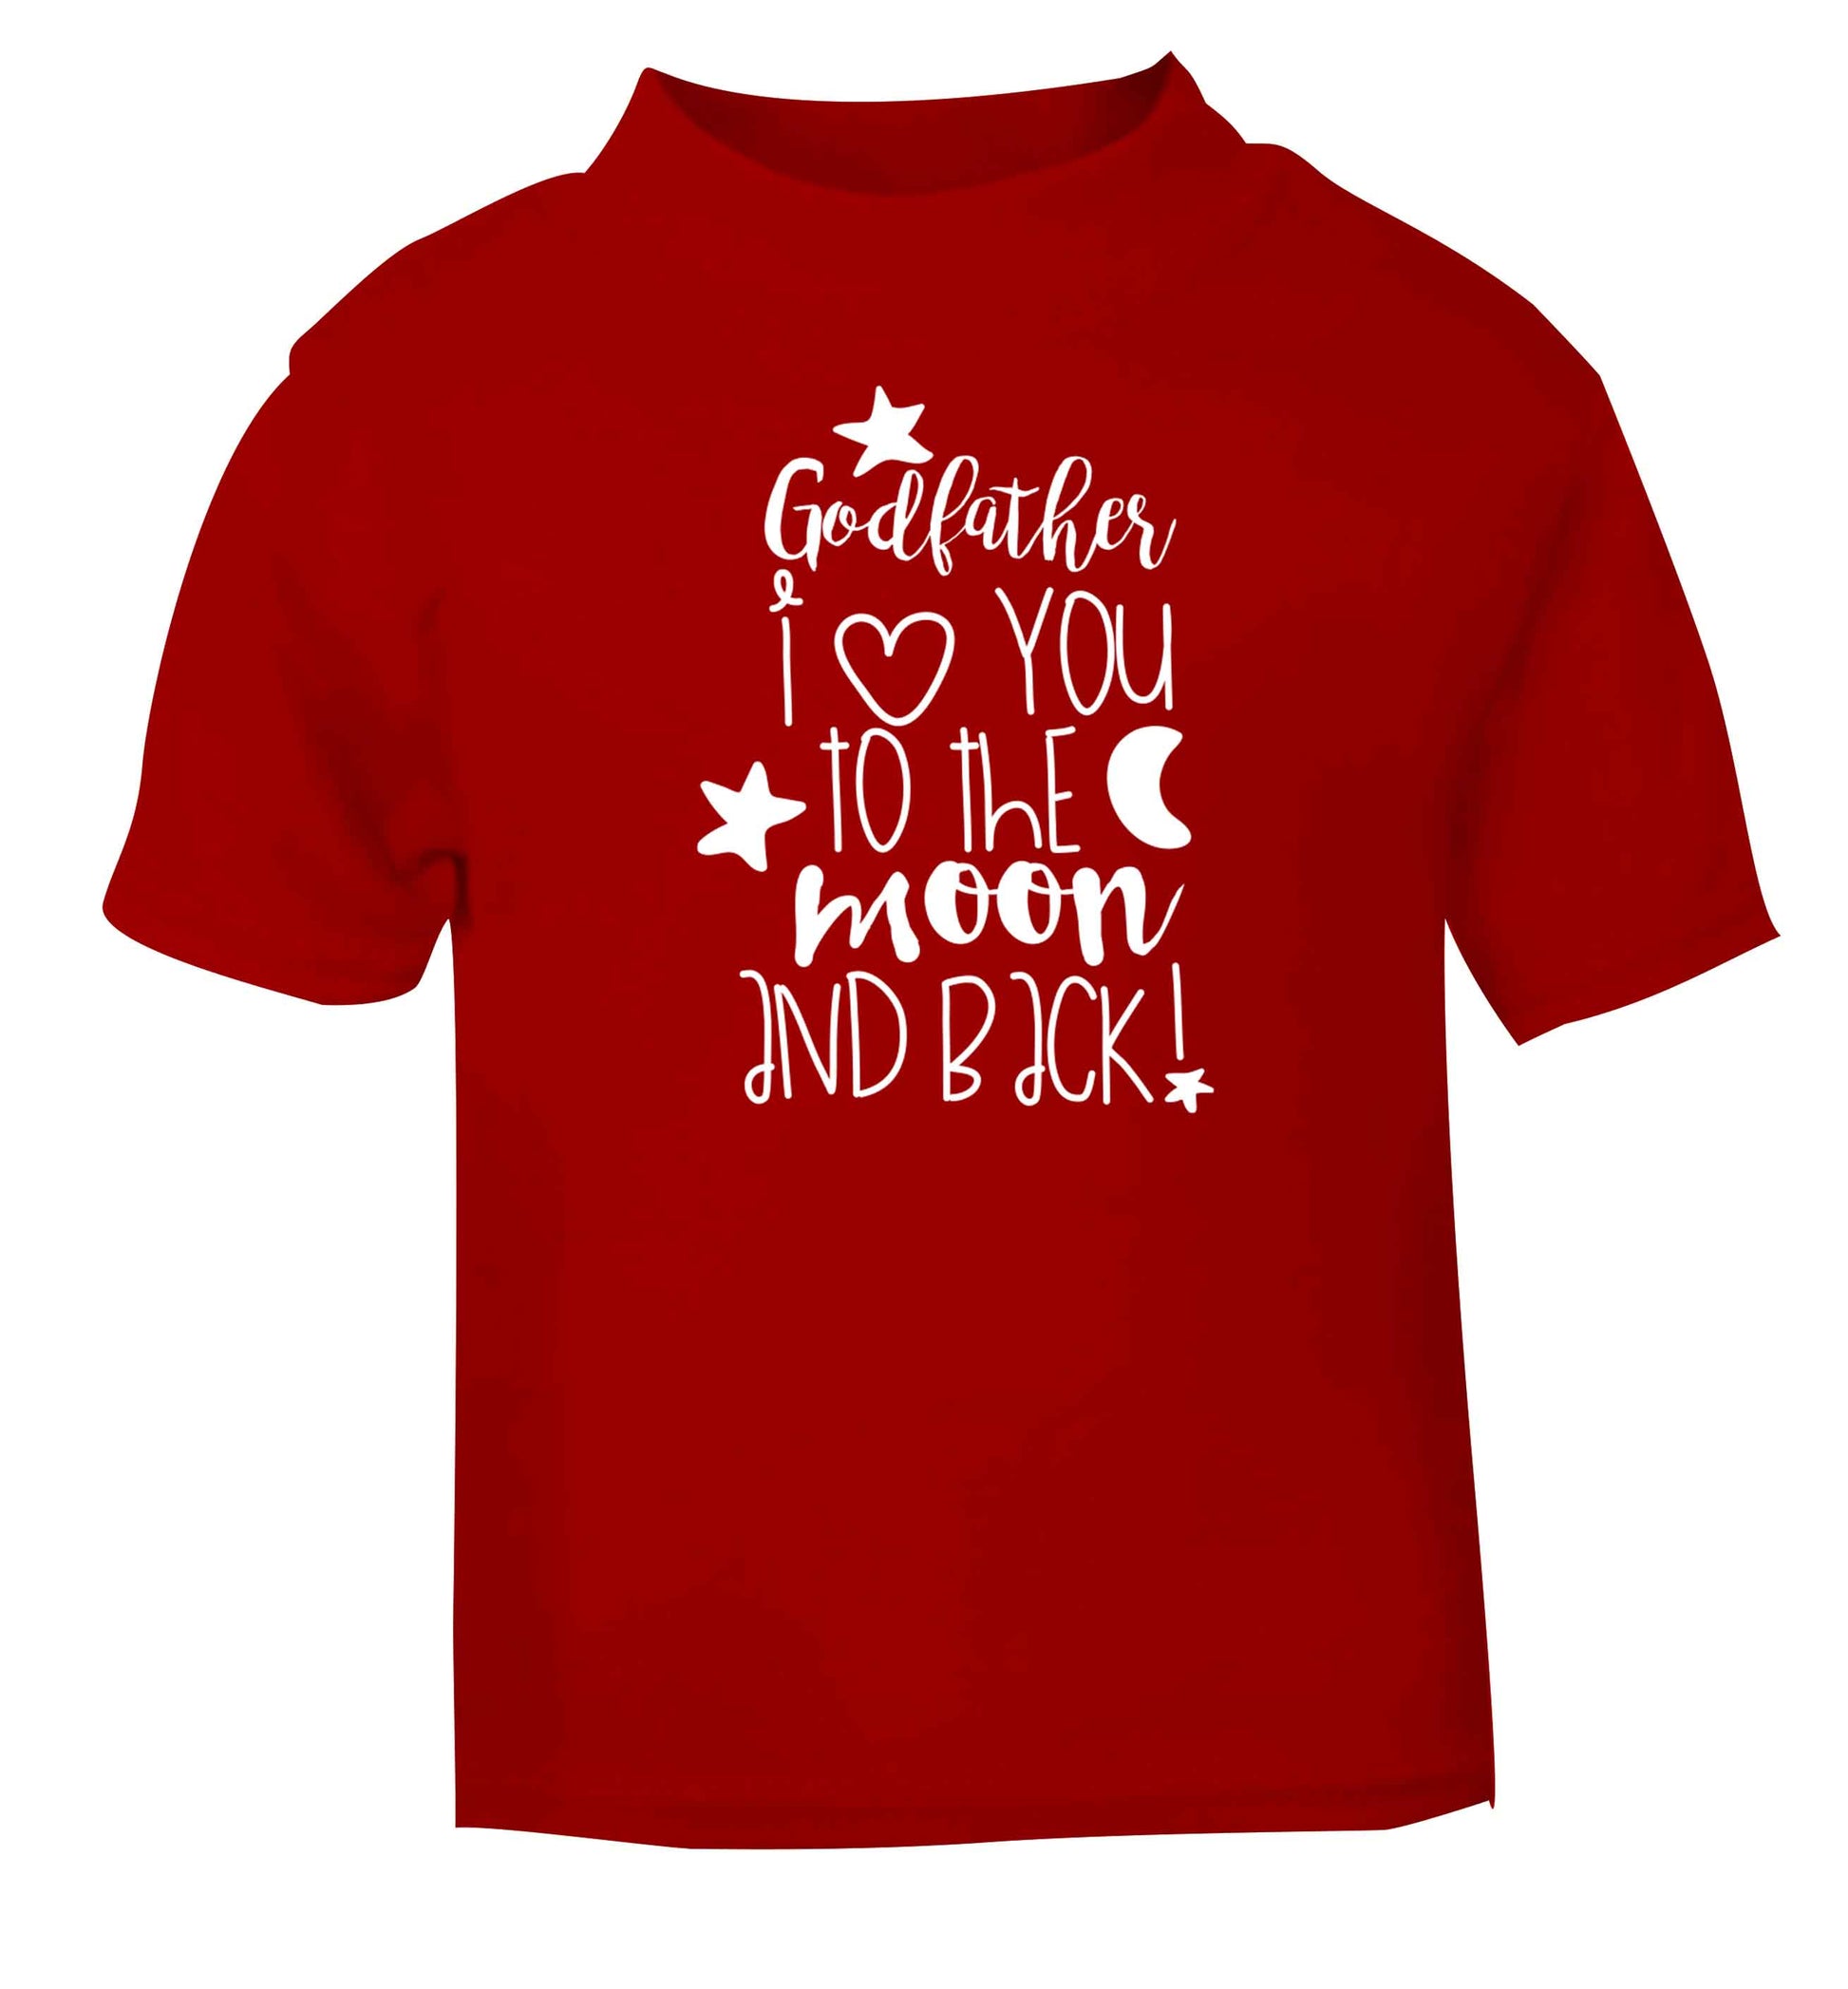 Godfather I love you to the moon and back red baby toddler Tshirt 2 Years